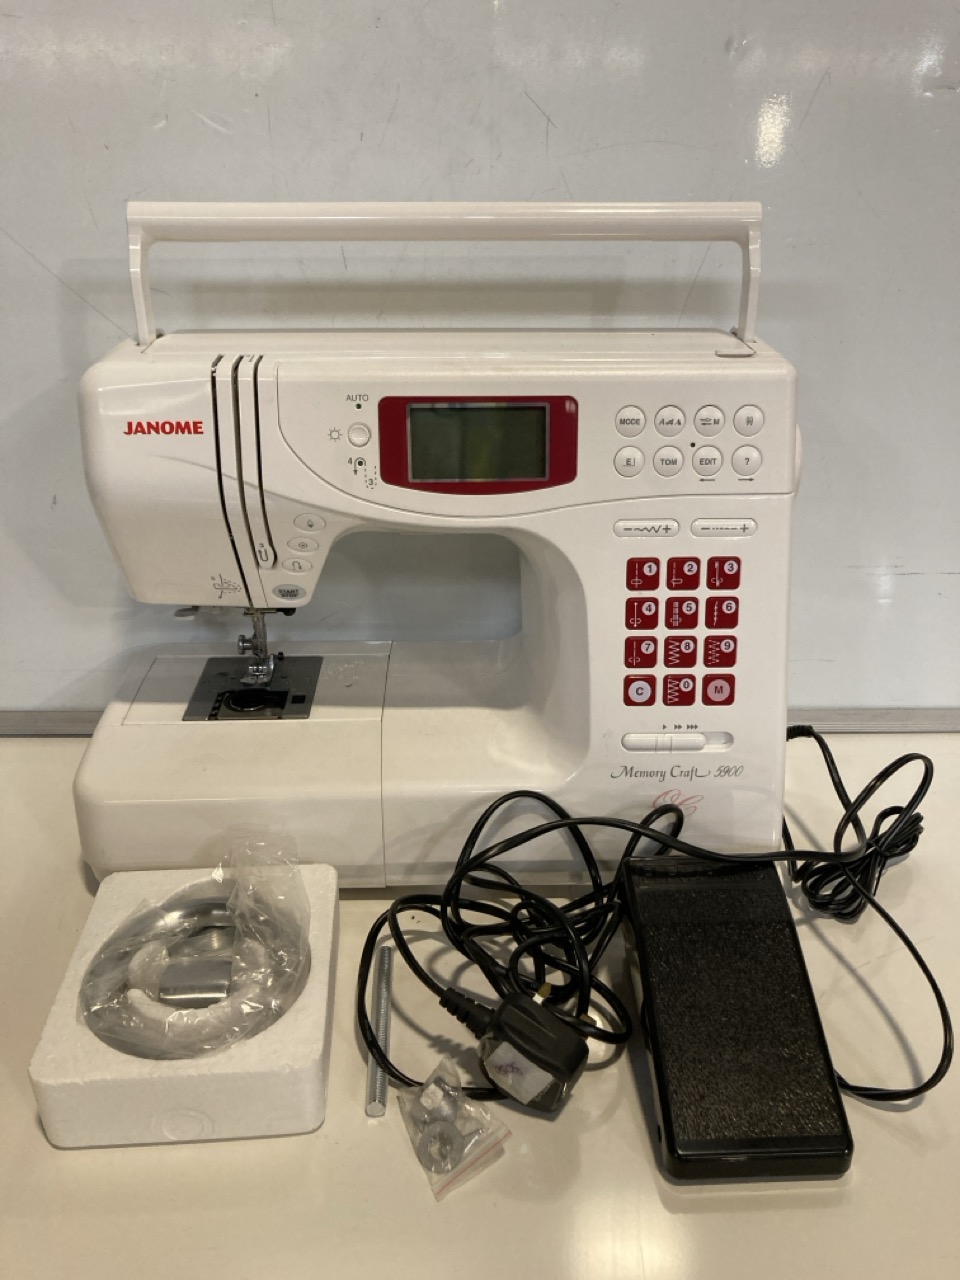 1 X JANOME MEMORY CRAFT 5900 SEWING MACHINE (UNBOXED)